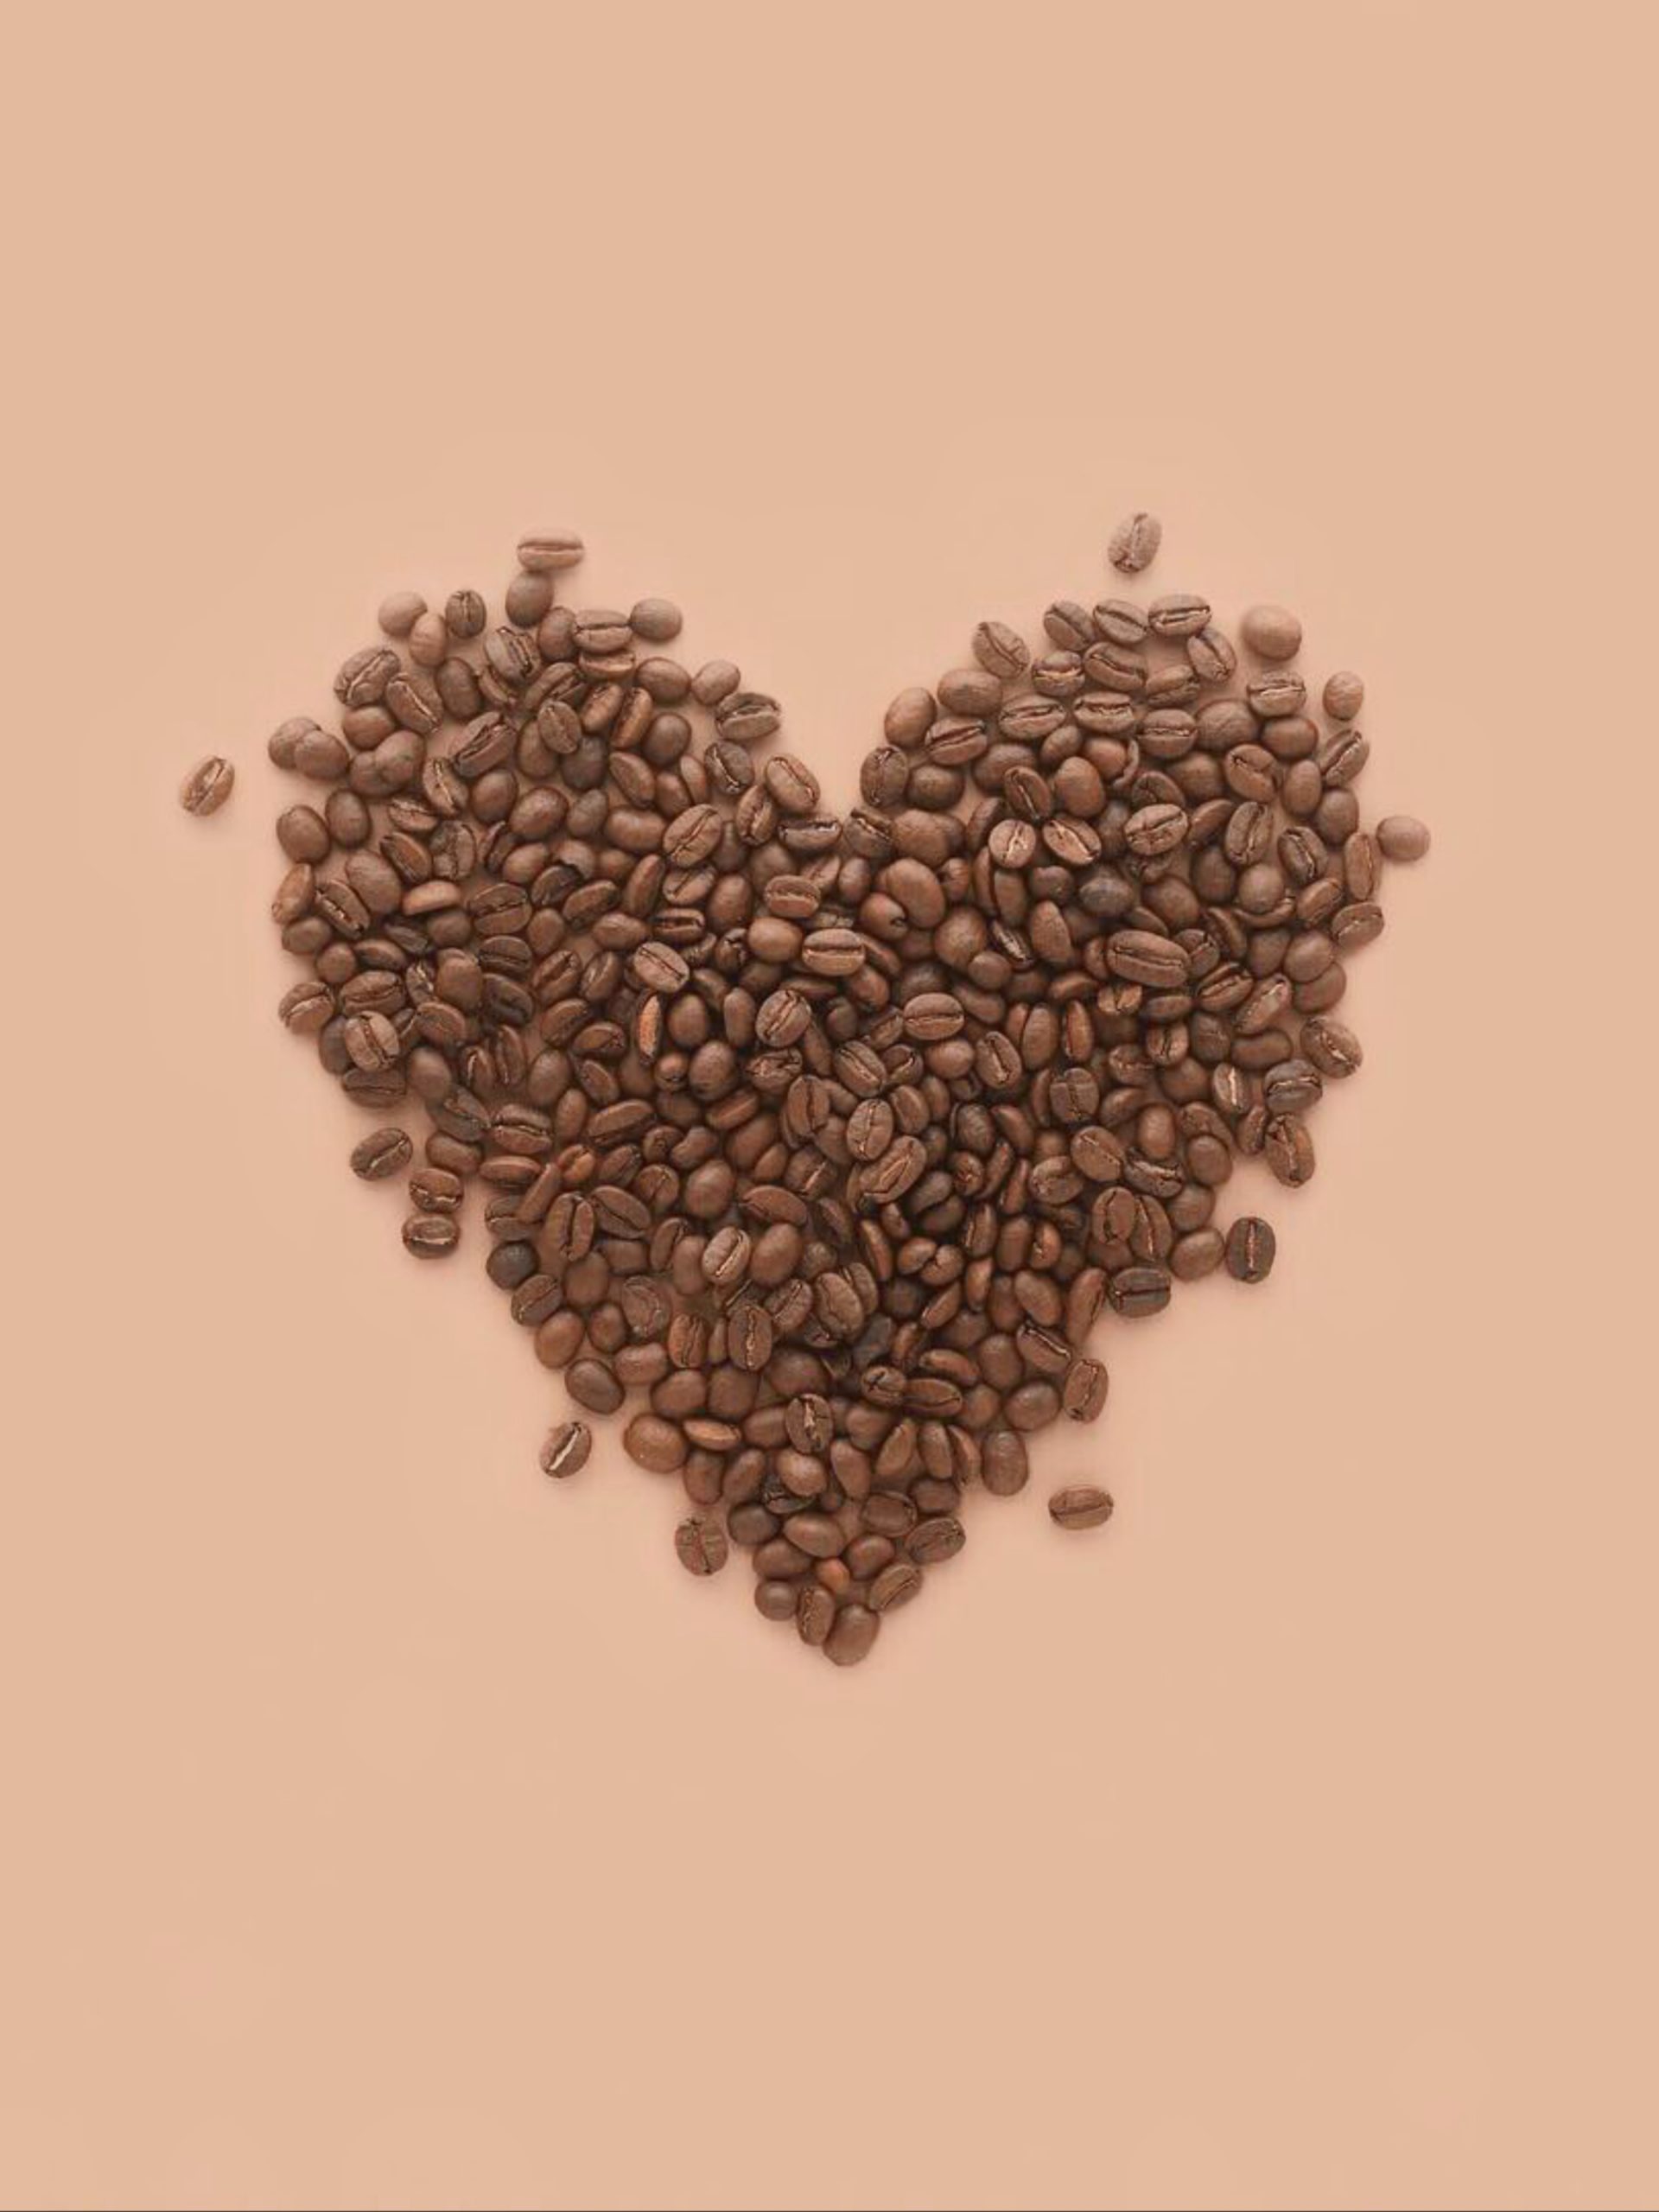 Heart shape made with coffee beans